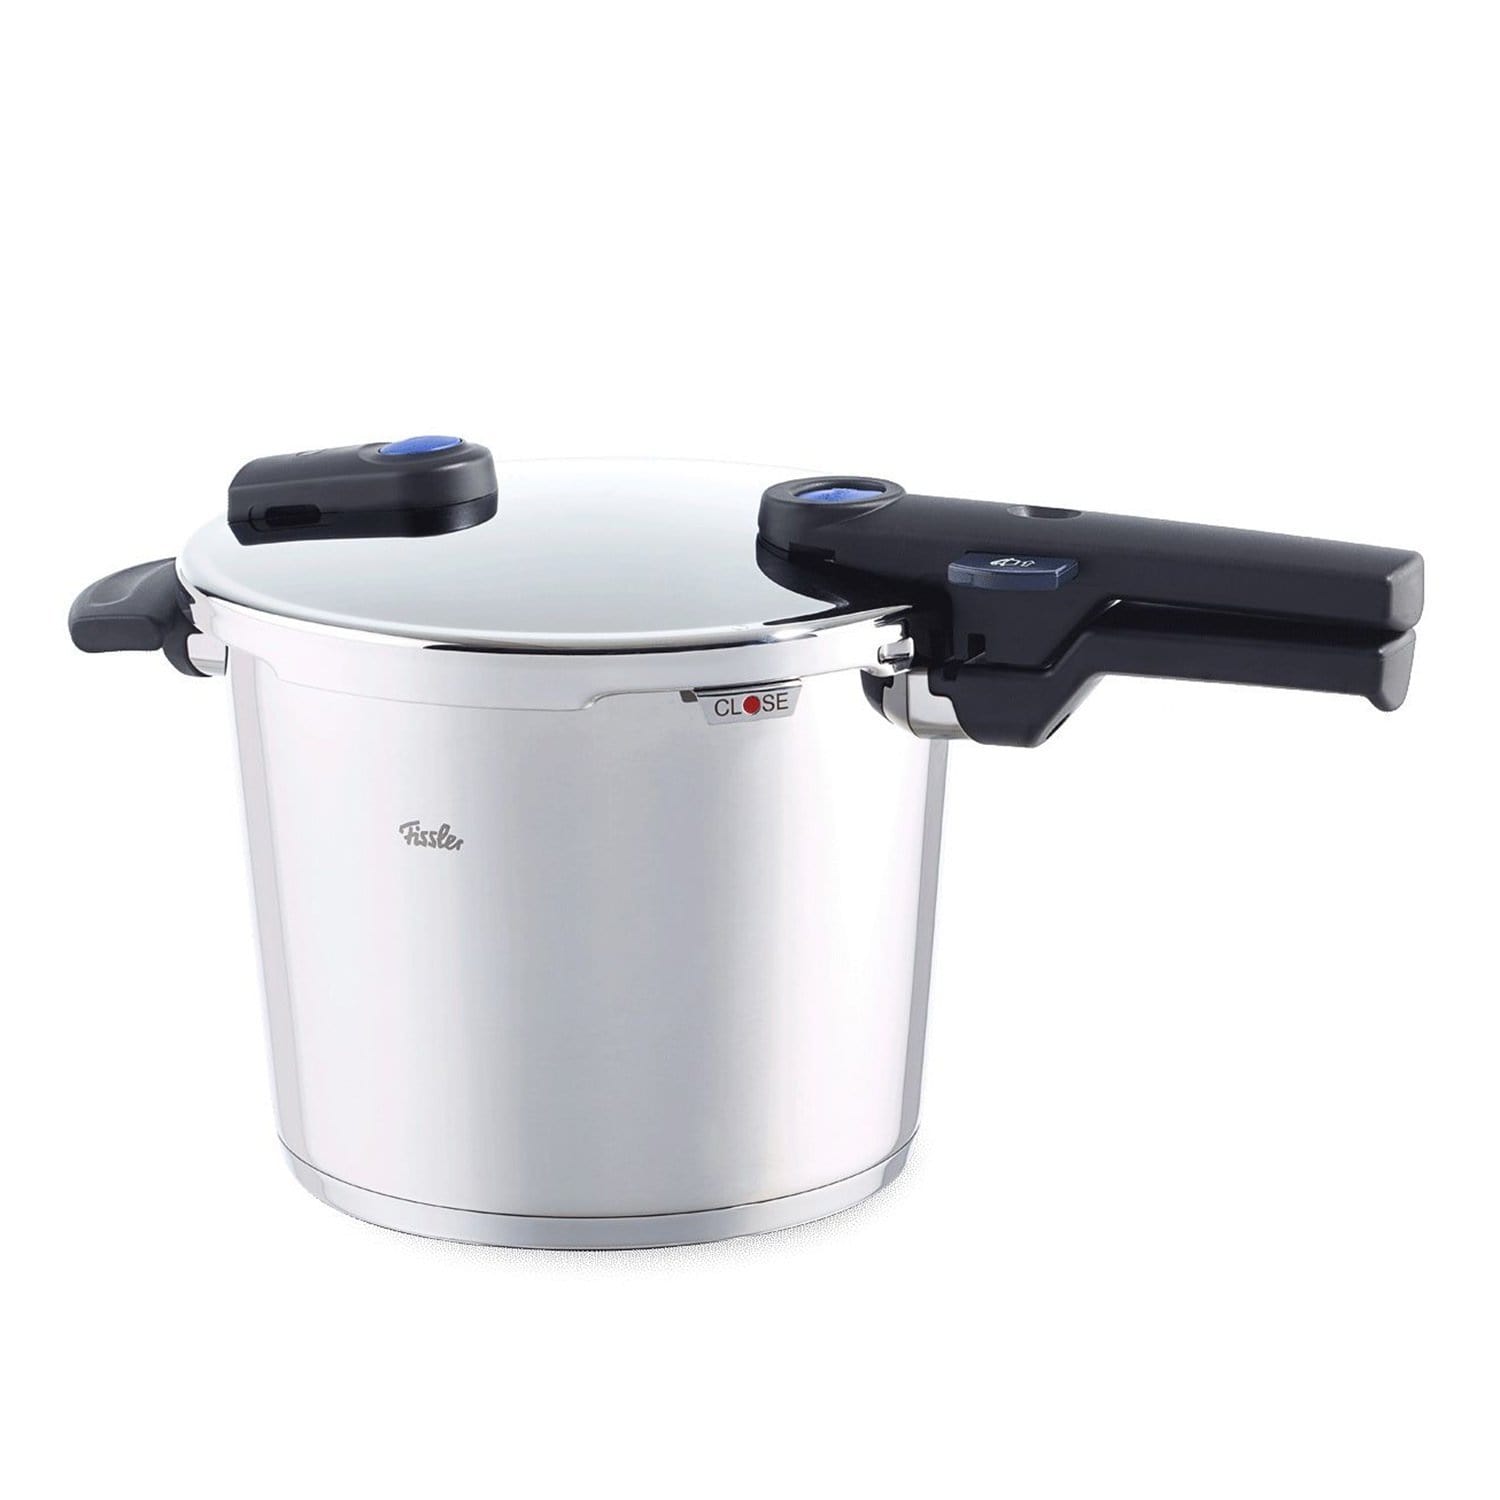 Fissler Vitaquick Pressure Cooker without Insert - 6 Litres - 600-300-06-000/0 - Jashanmal Home